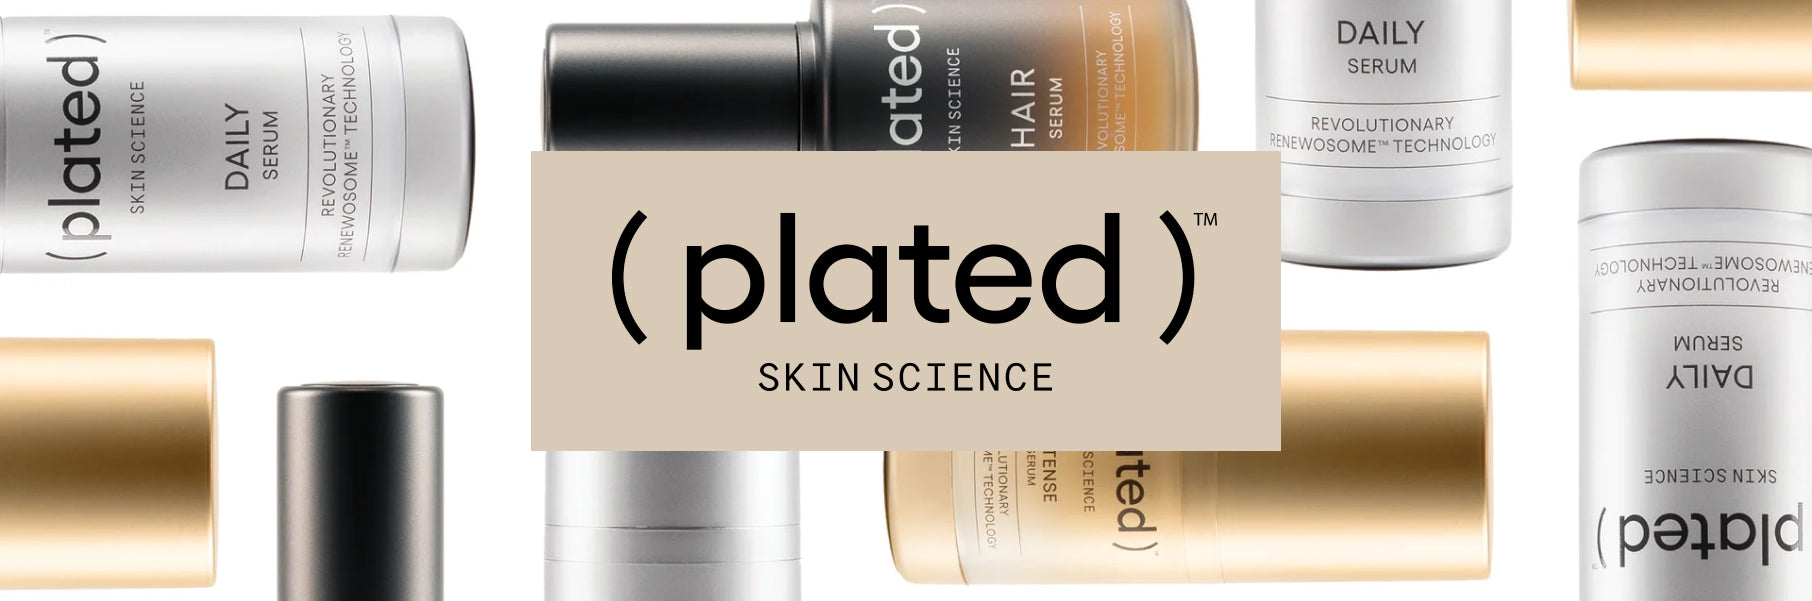 Several Plated Skin Science products arranged artistically, with the Plated logo superimposed.